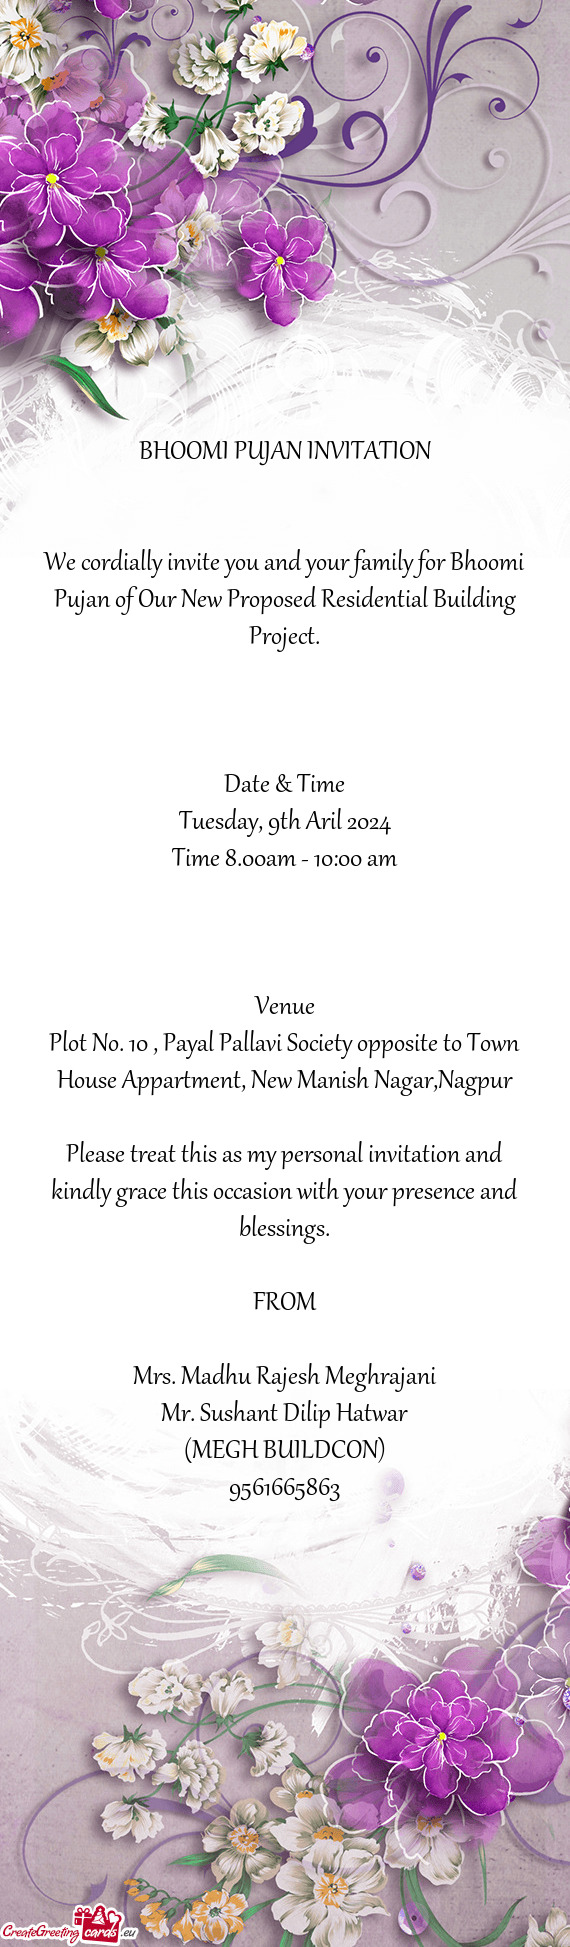 We cordially invite you and your family for Bhoomi Pujan of Our New Proposed Residential Building Pr